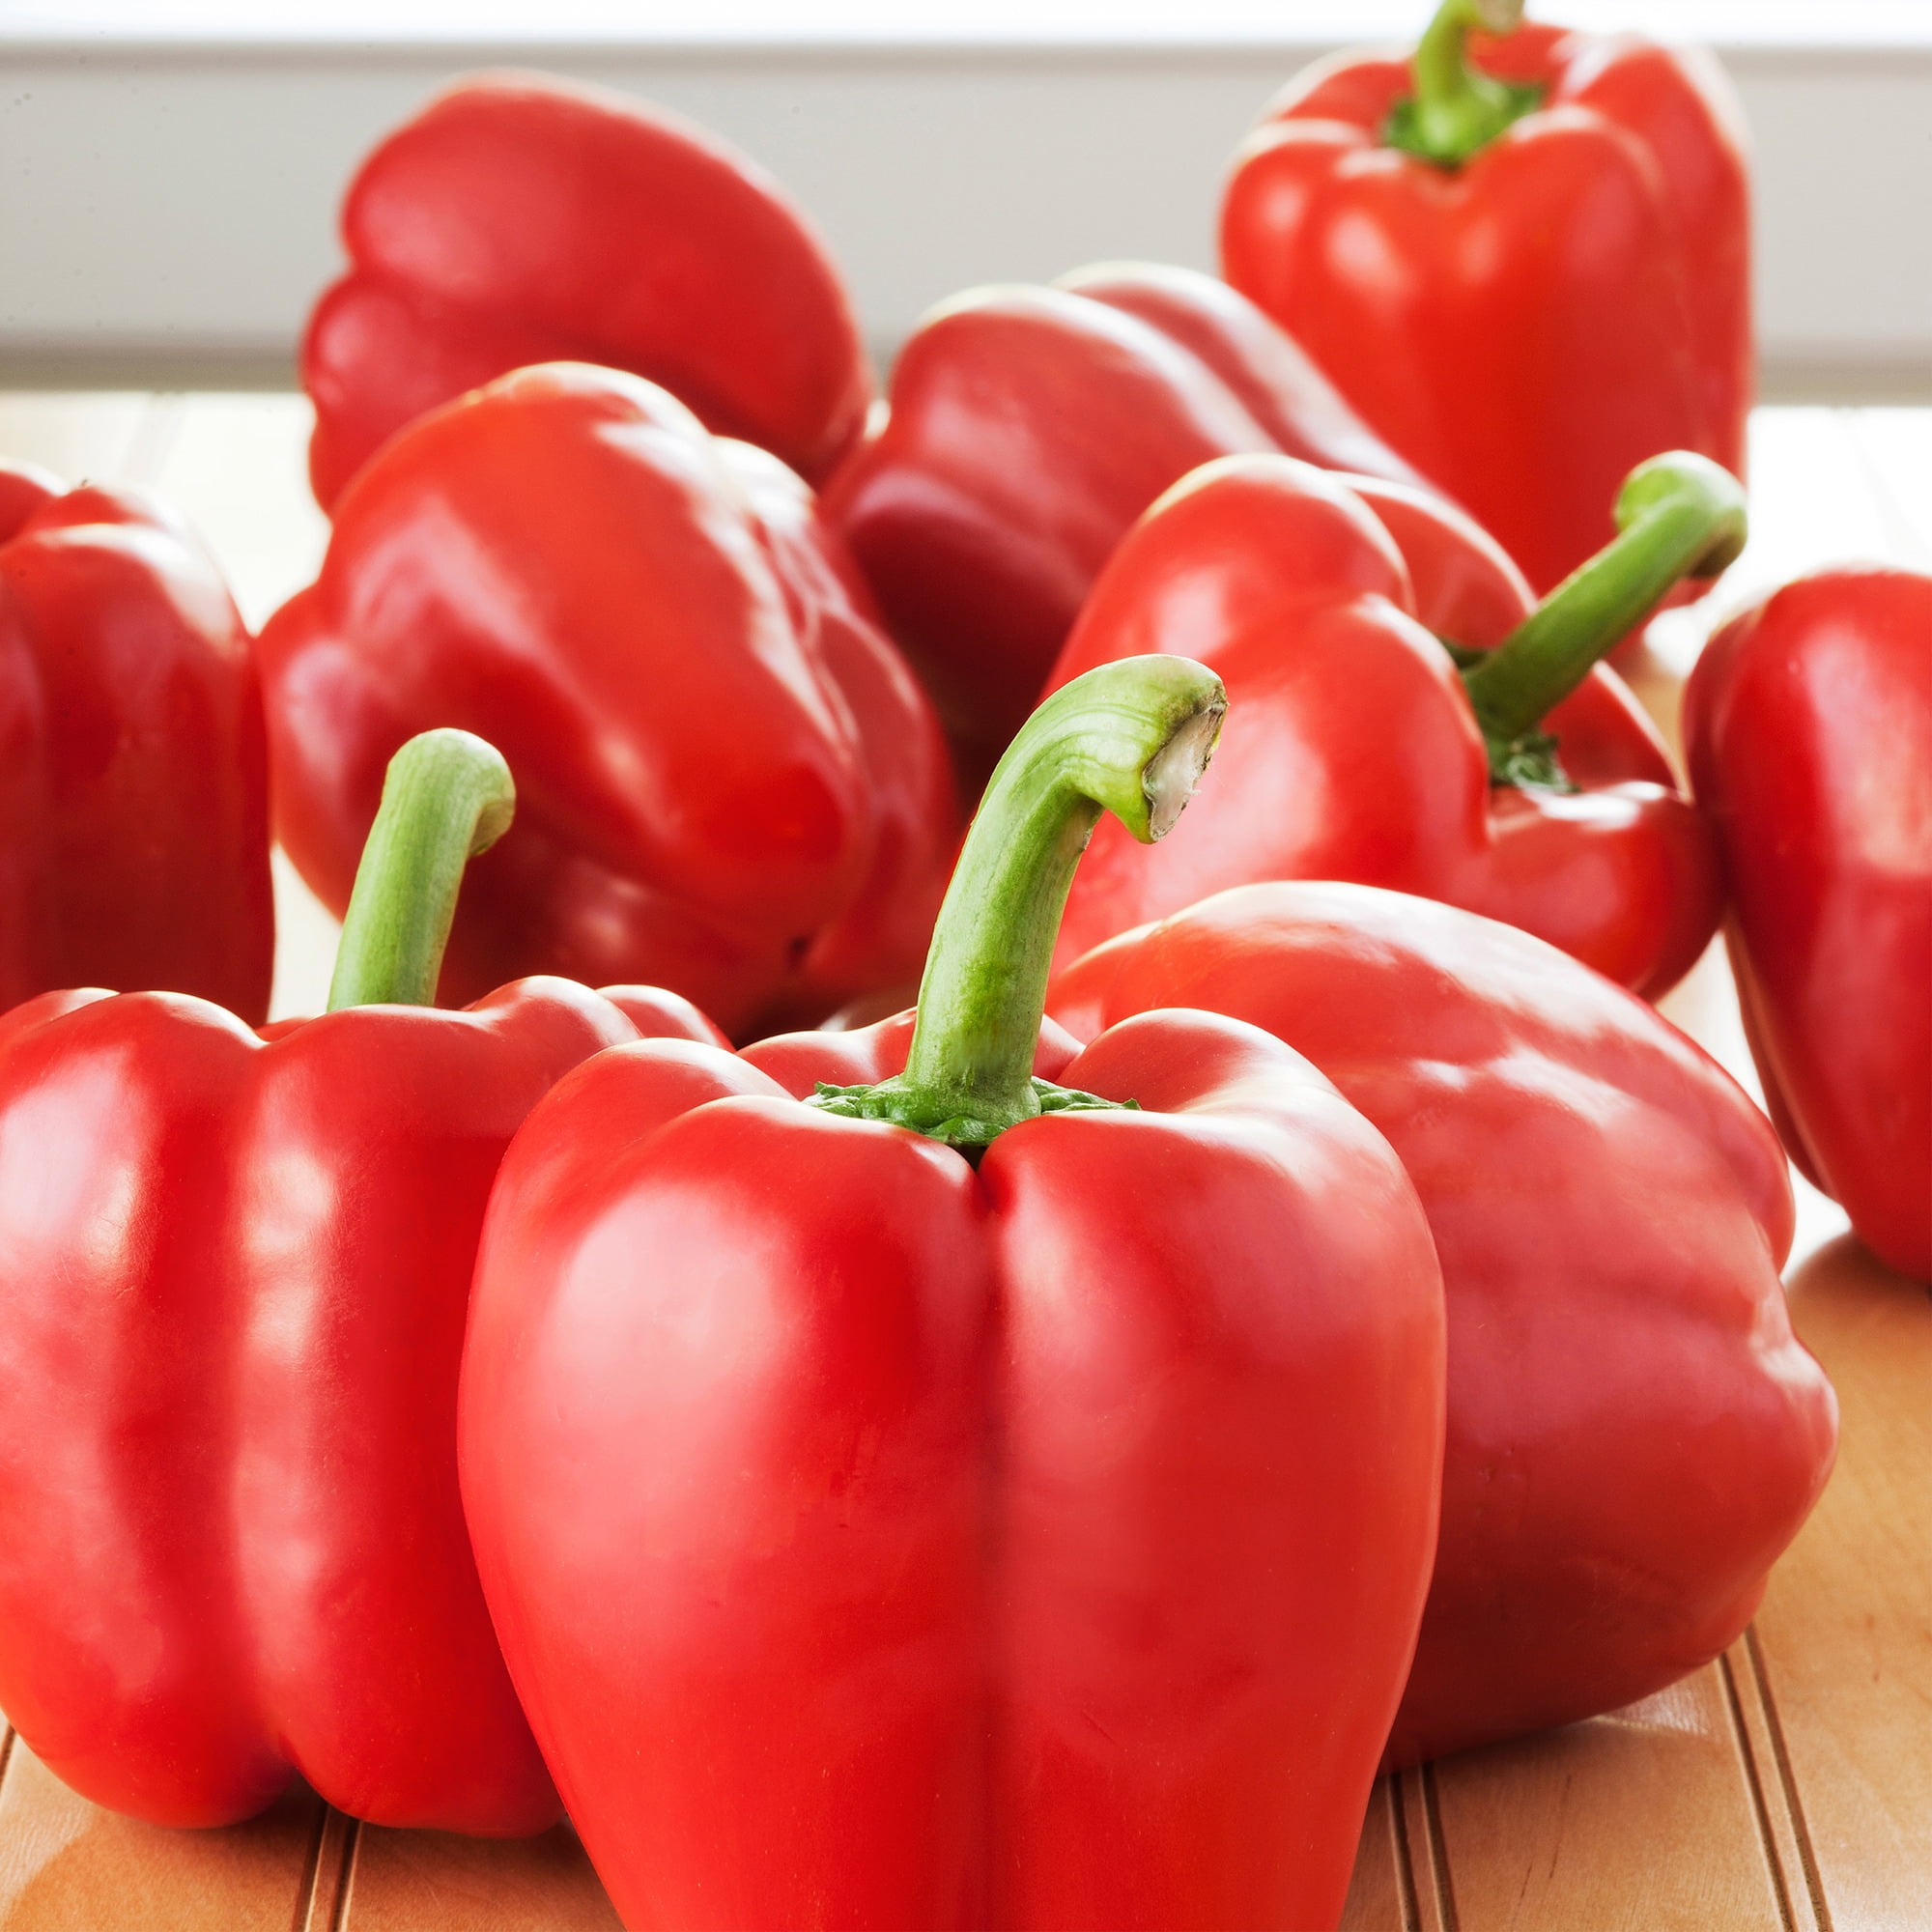 Red Bell Pepper 1 Lb. - Wholey's Curbside